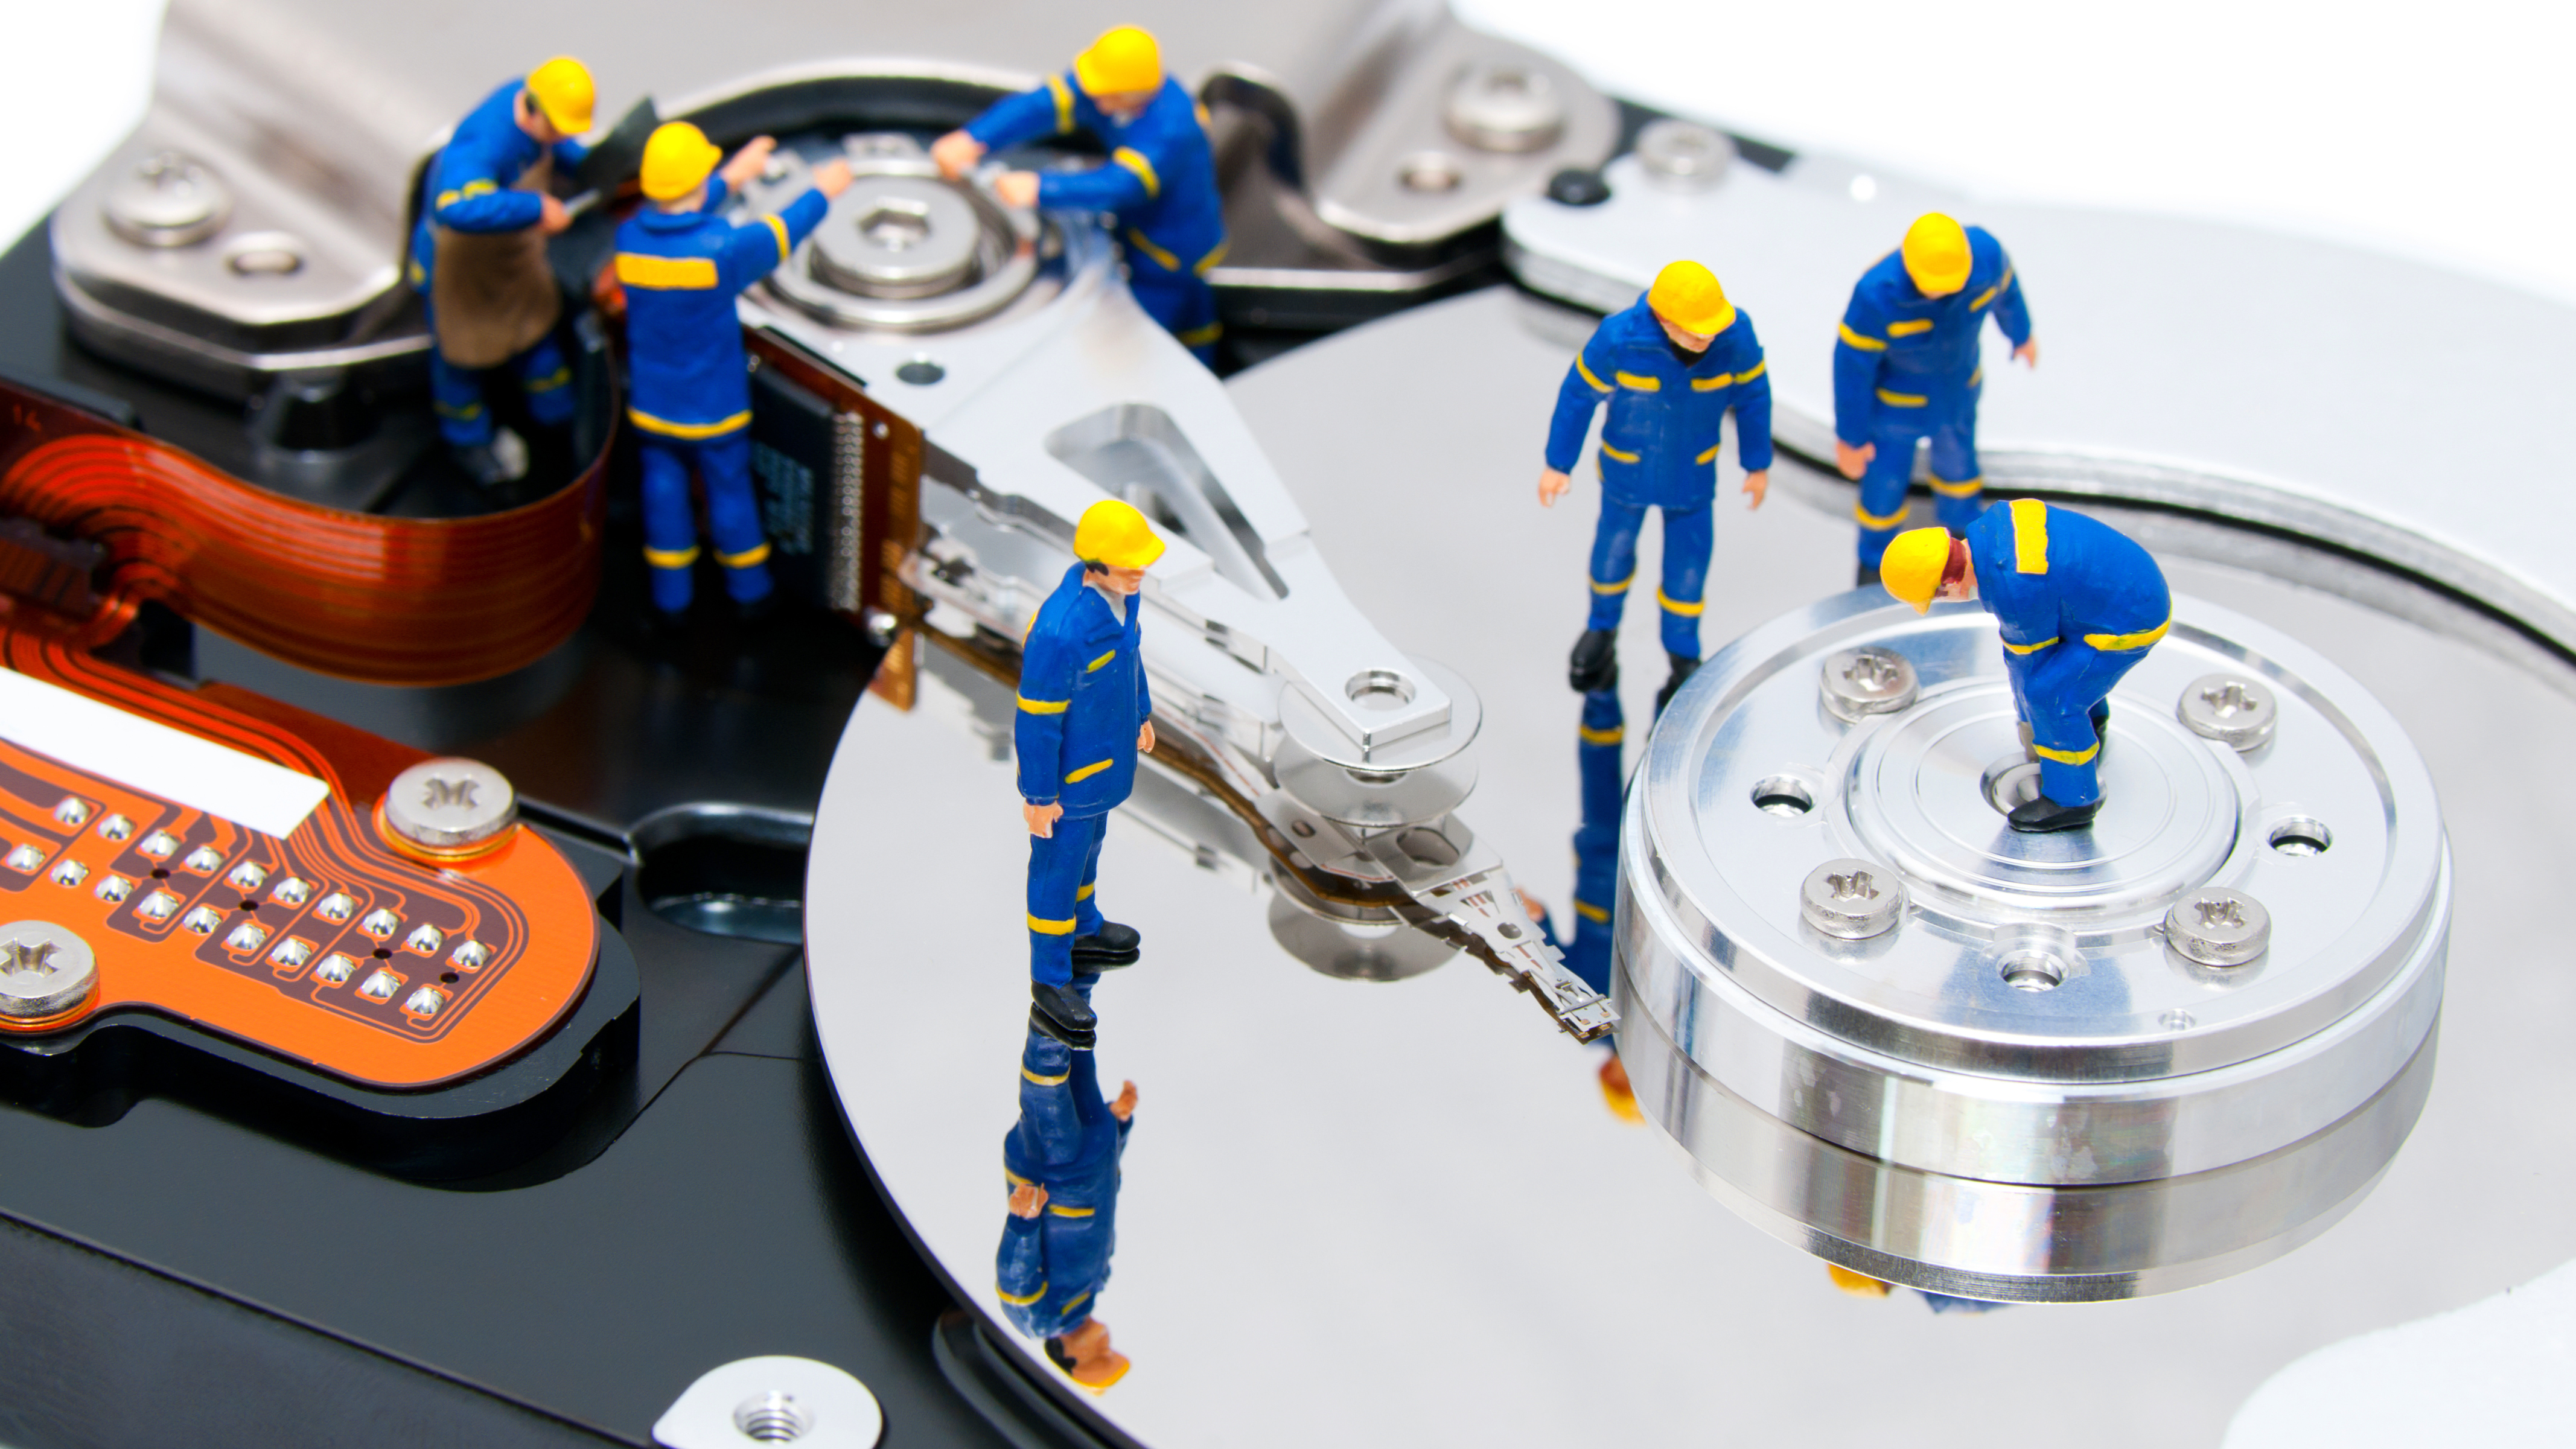 small figurines made to look like they are repairing a hard drive